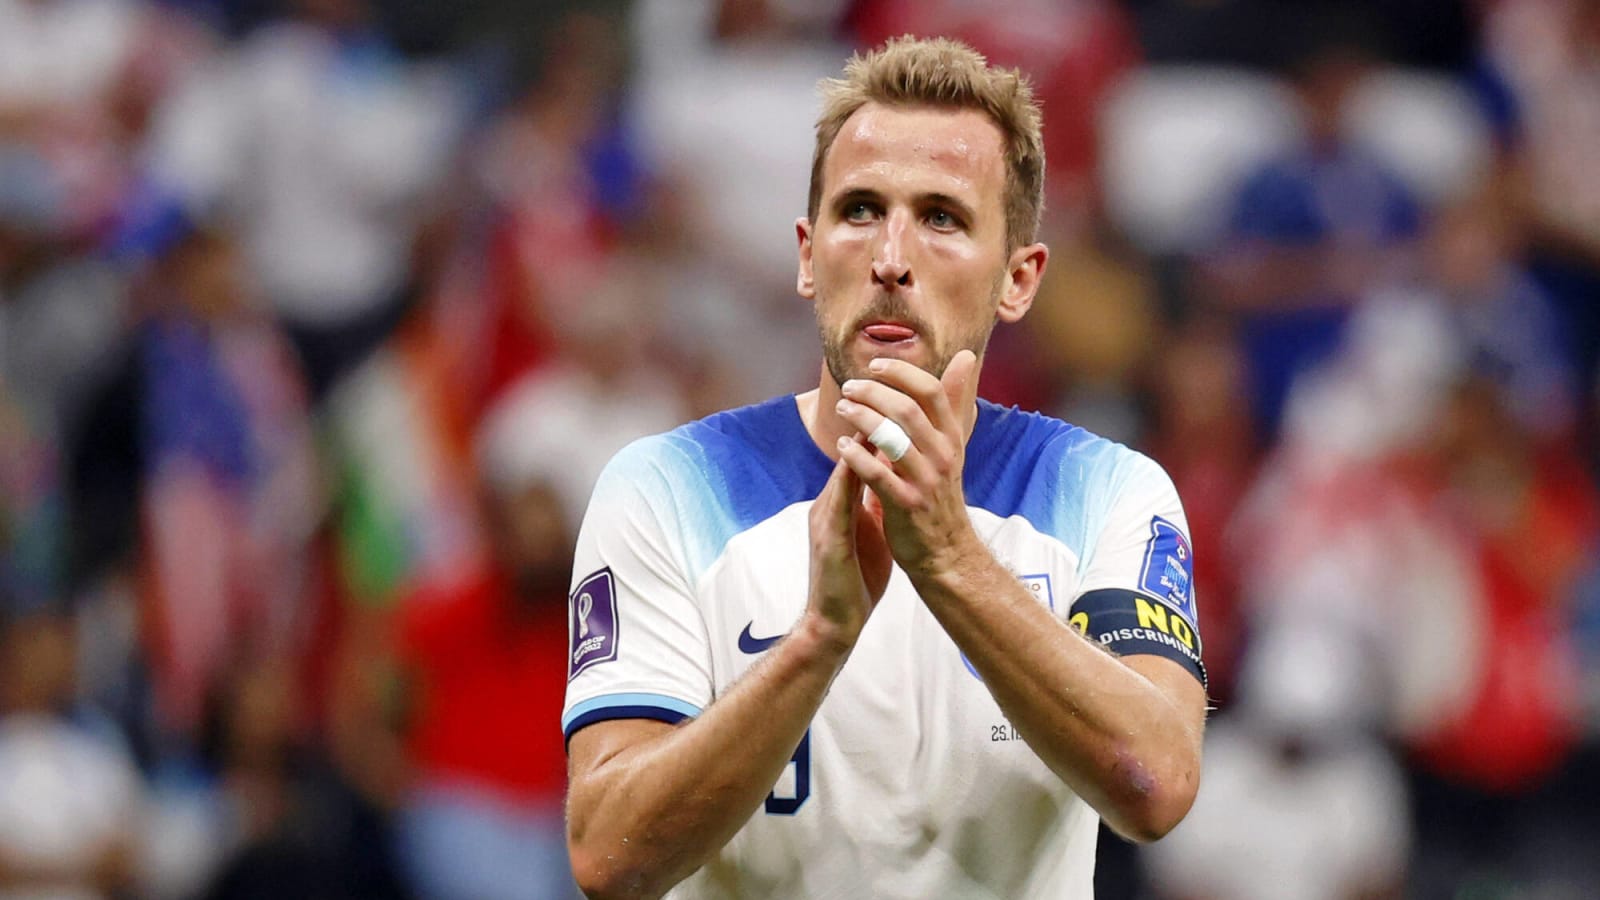 Manchester United reportedly make decision about Harry Kane